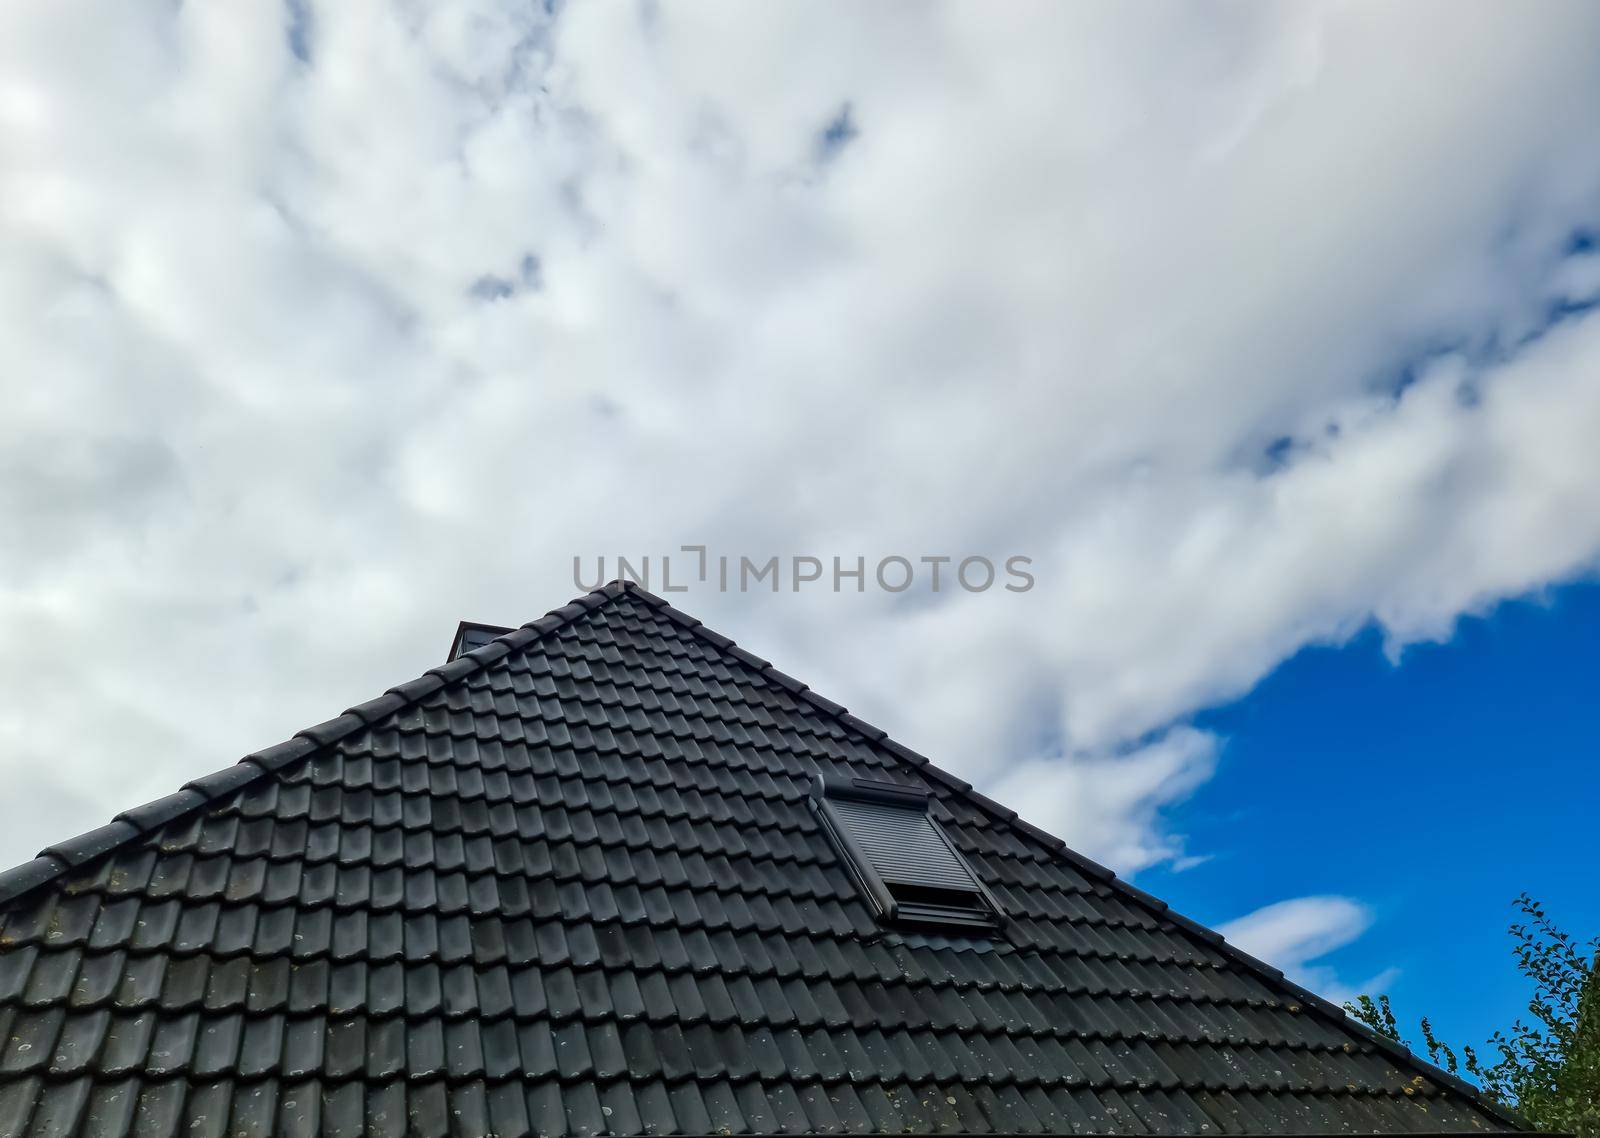 Open roof window in velux style with black roof tiles. by MP_foto71